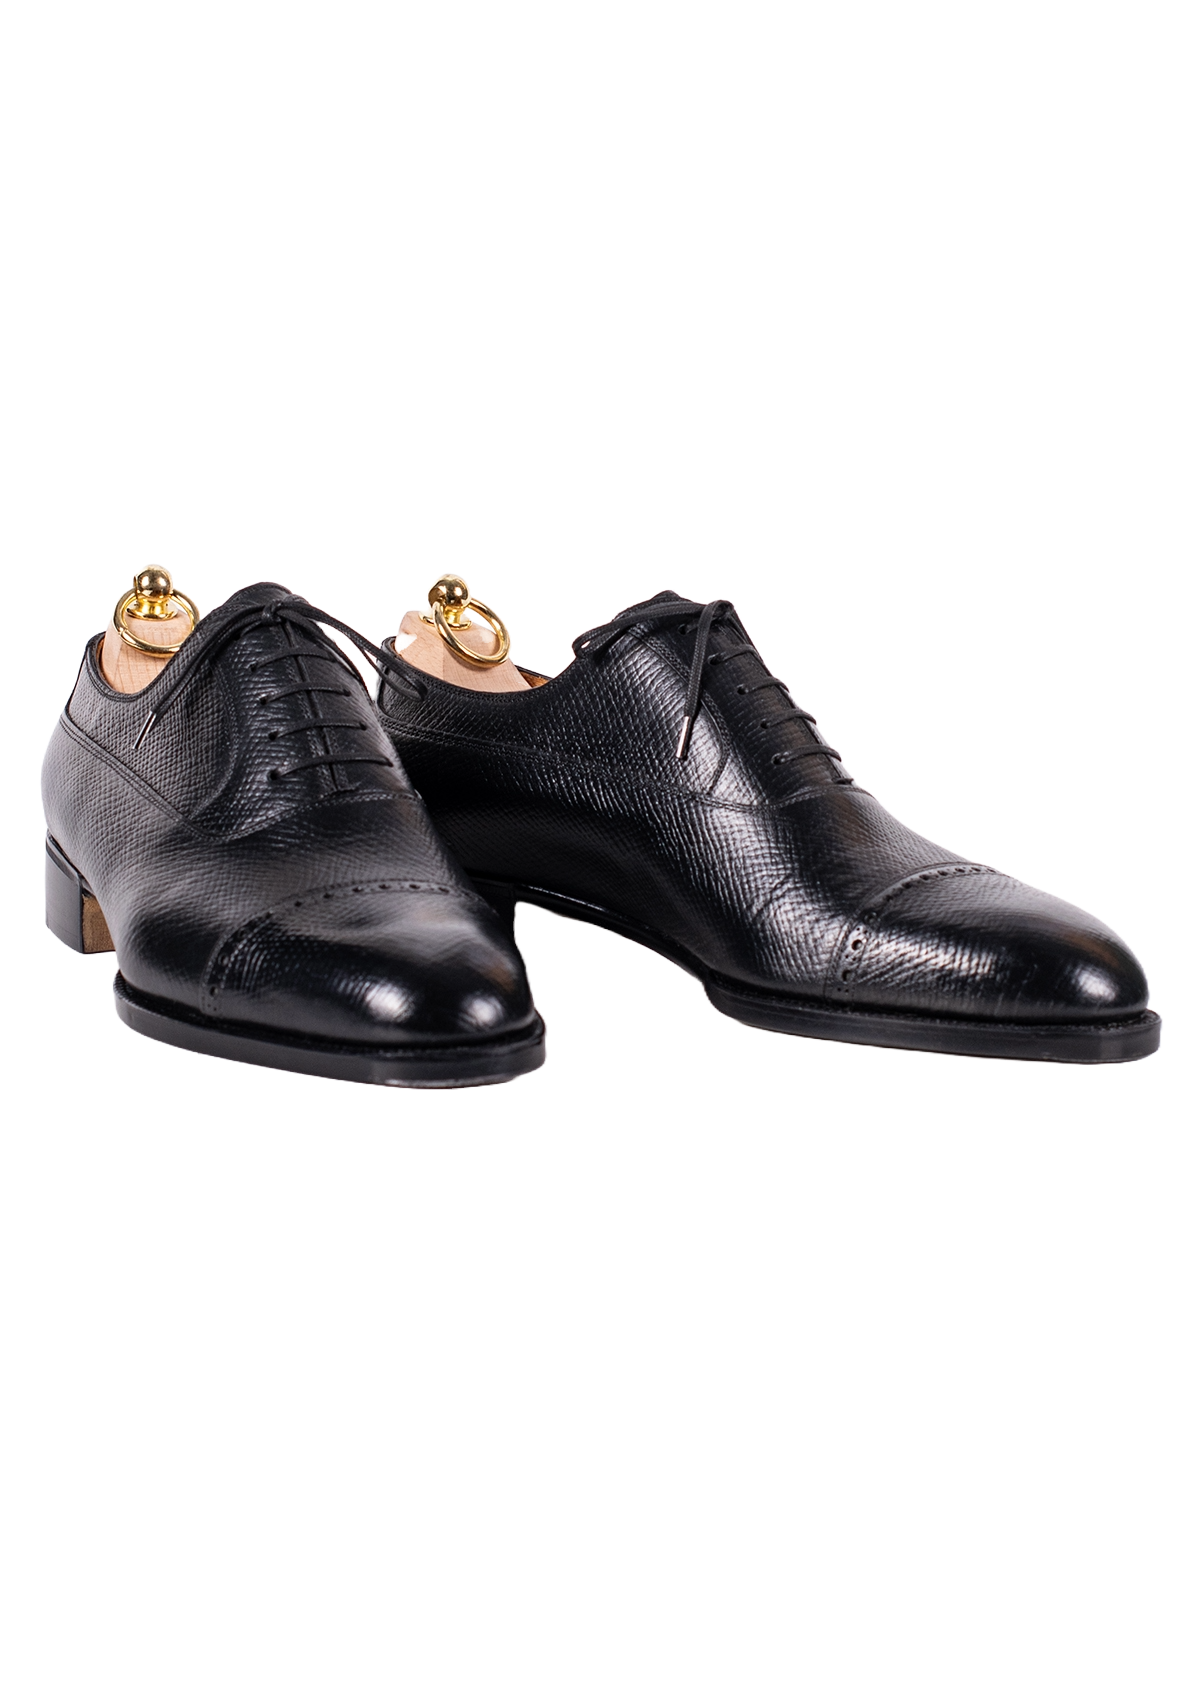 Black Oxford with Brogued Cap toe